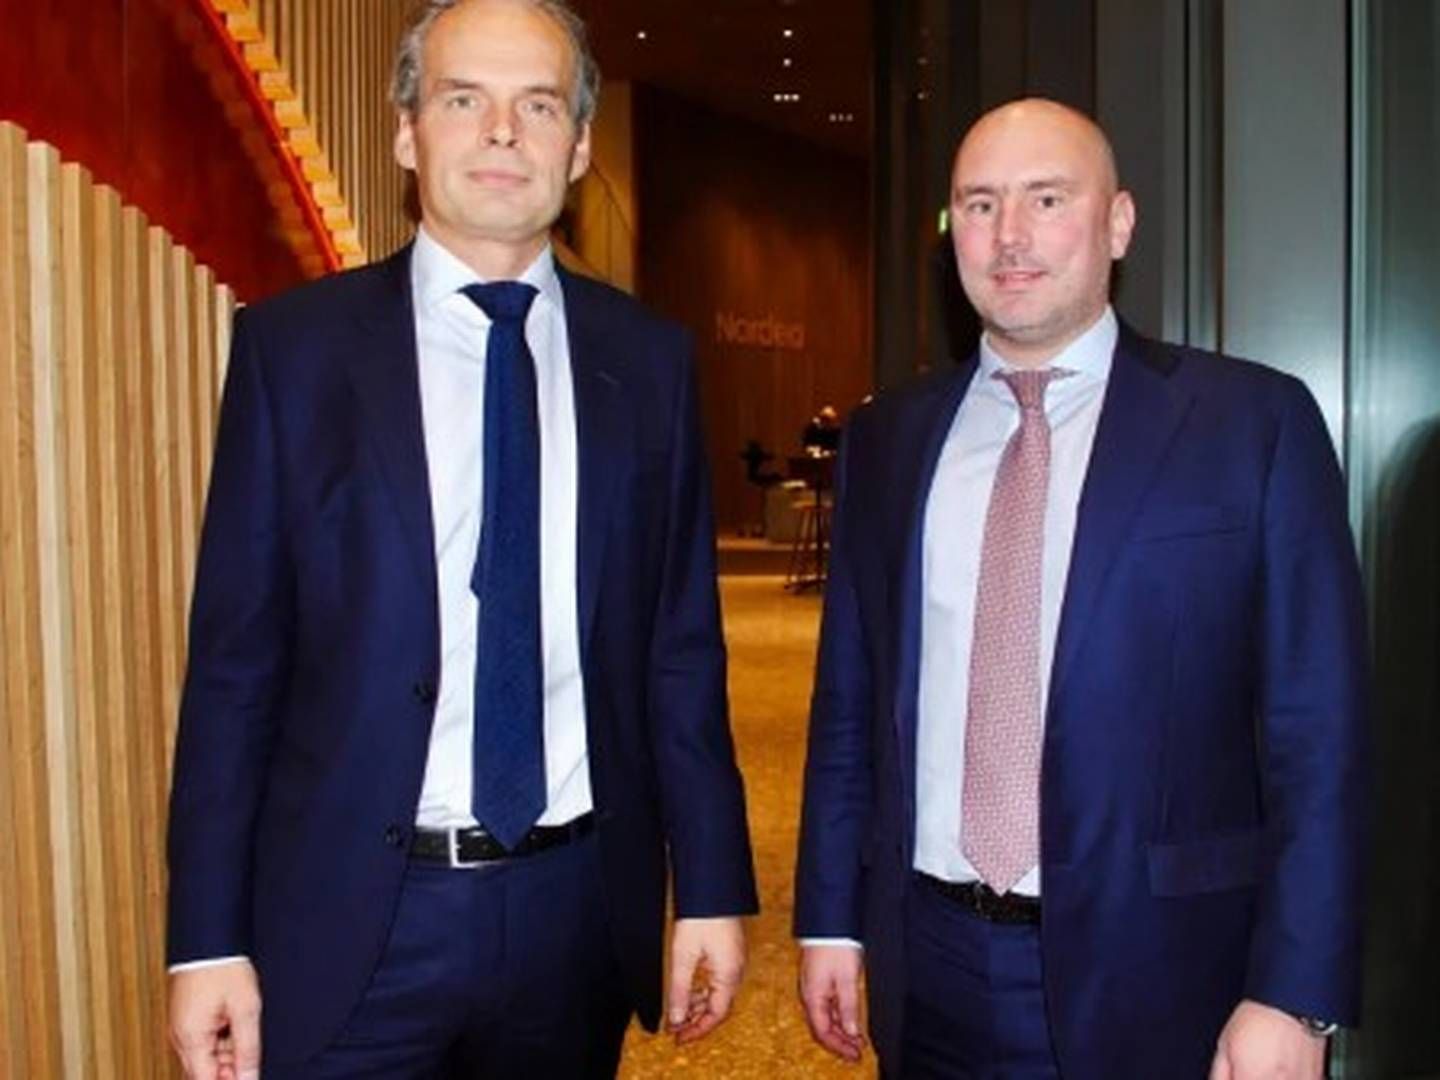 Geir Atle Lerkerød, head of Nordic shipping, and Thor-Erik Bech, head of international shipping and offshore, Nordea. | Photo: Nordea PR